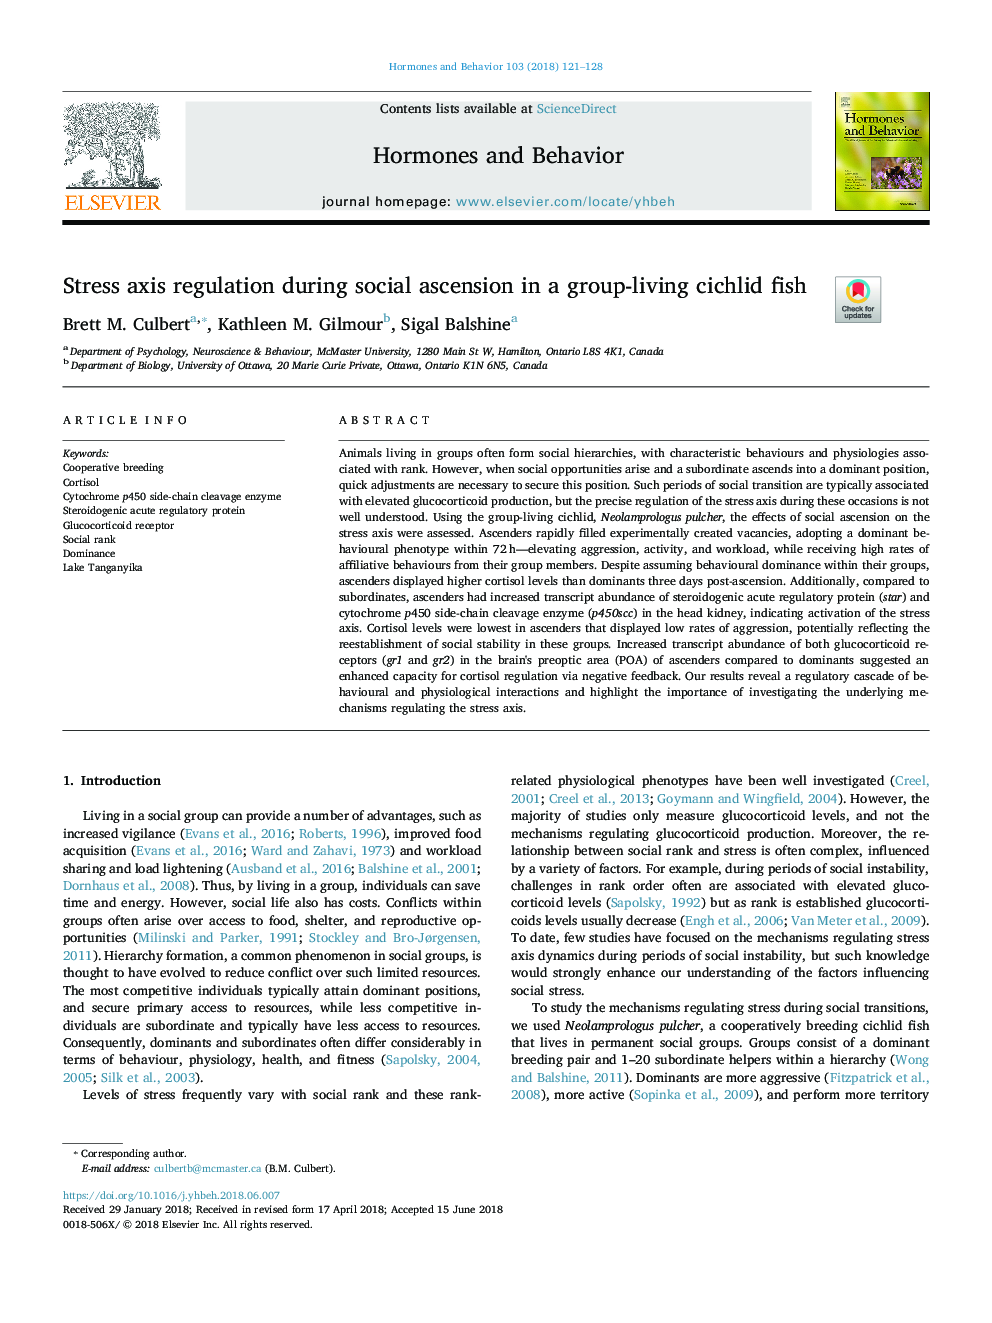 Stress axis regulation during social ascension in a group-living cichlid fish